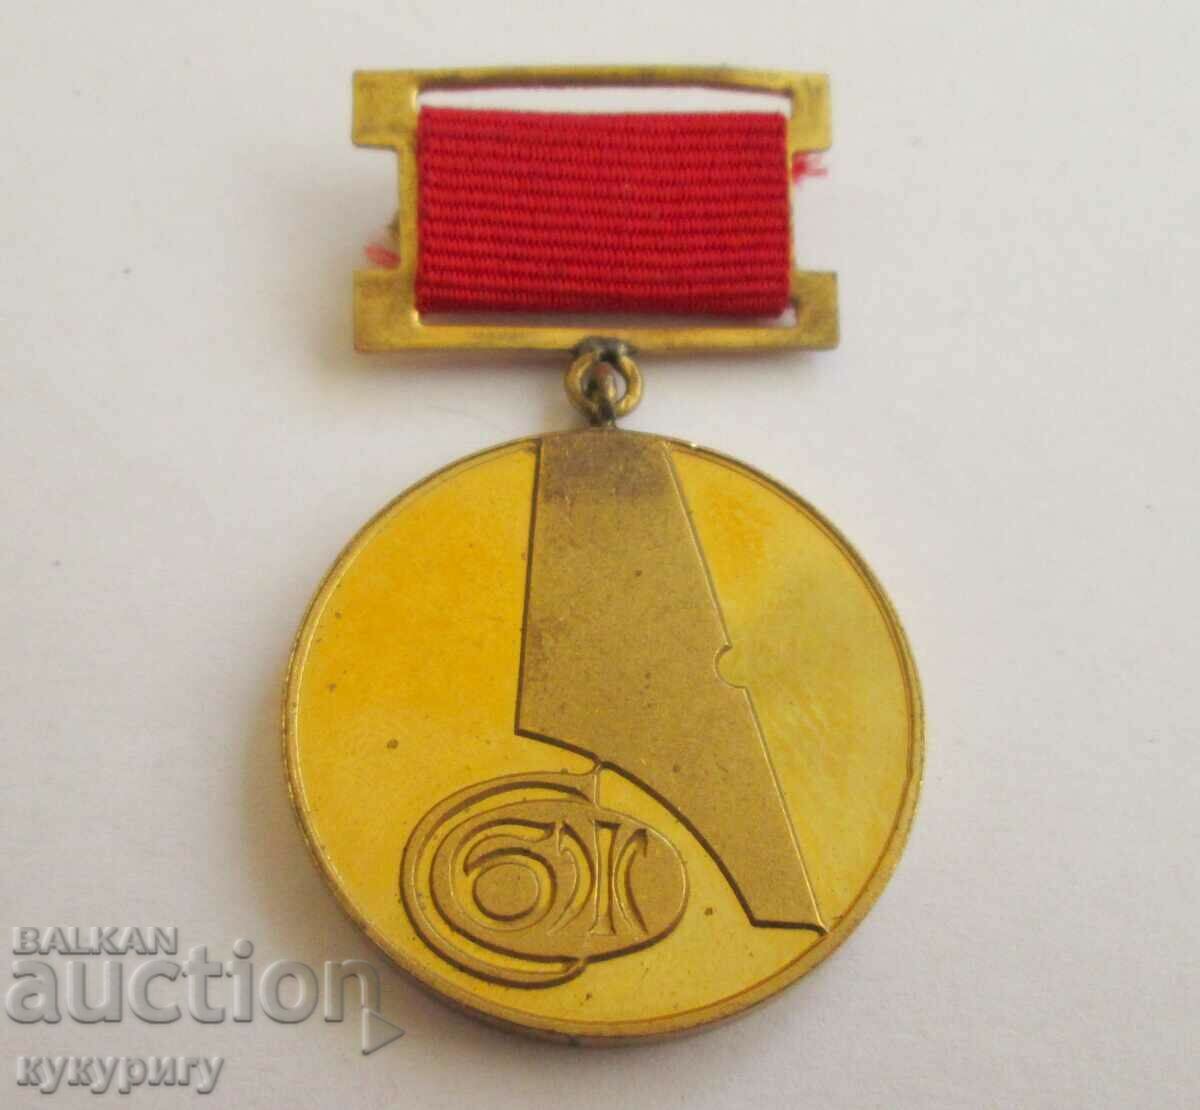 Star Sots medal badge of honor of SBZ journalists